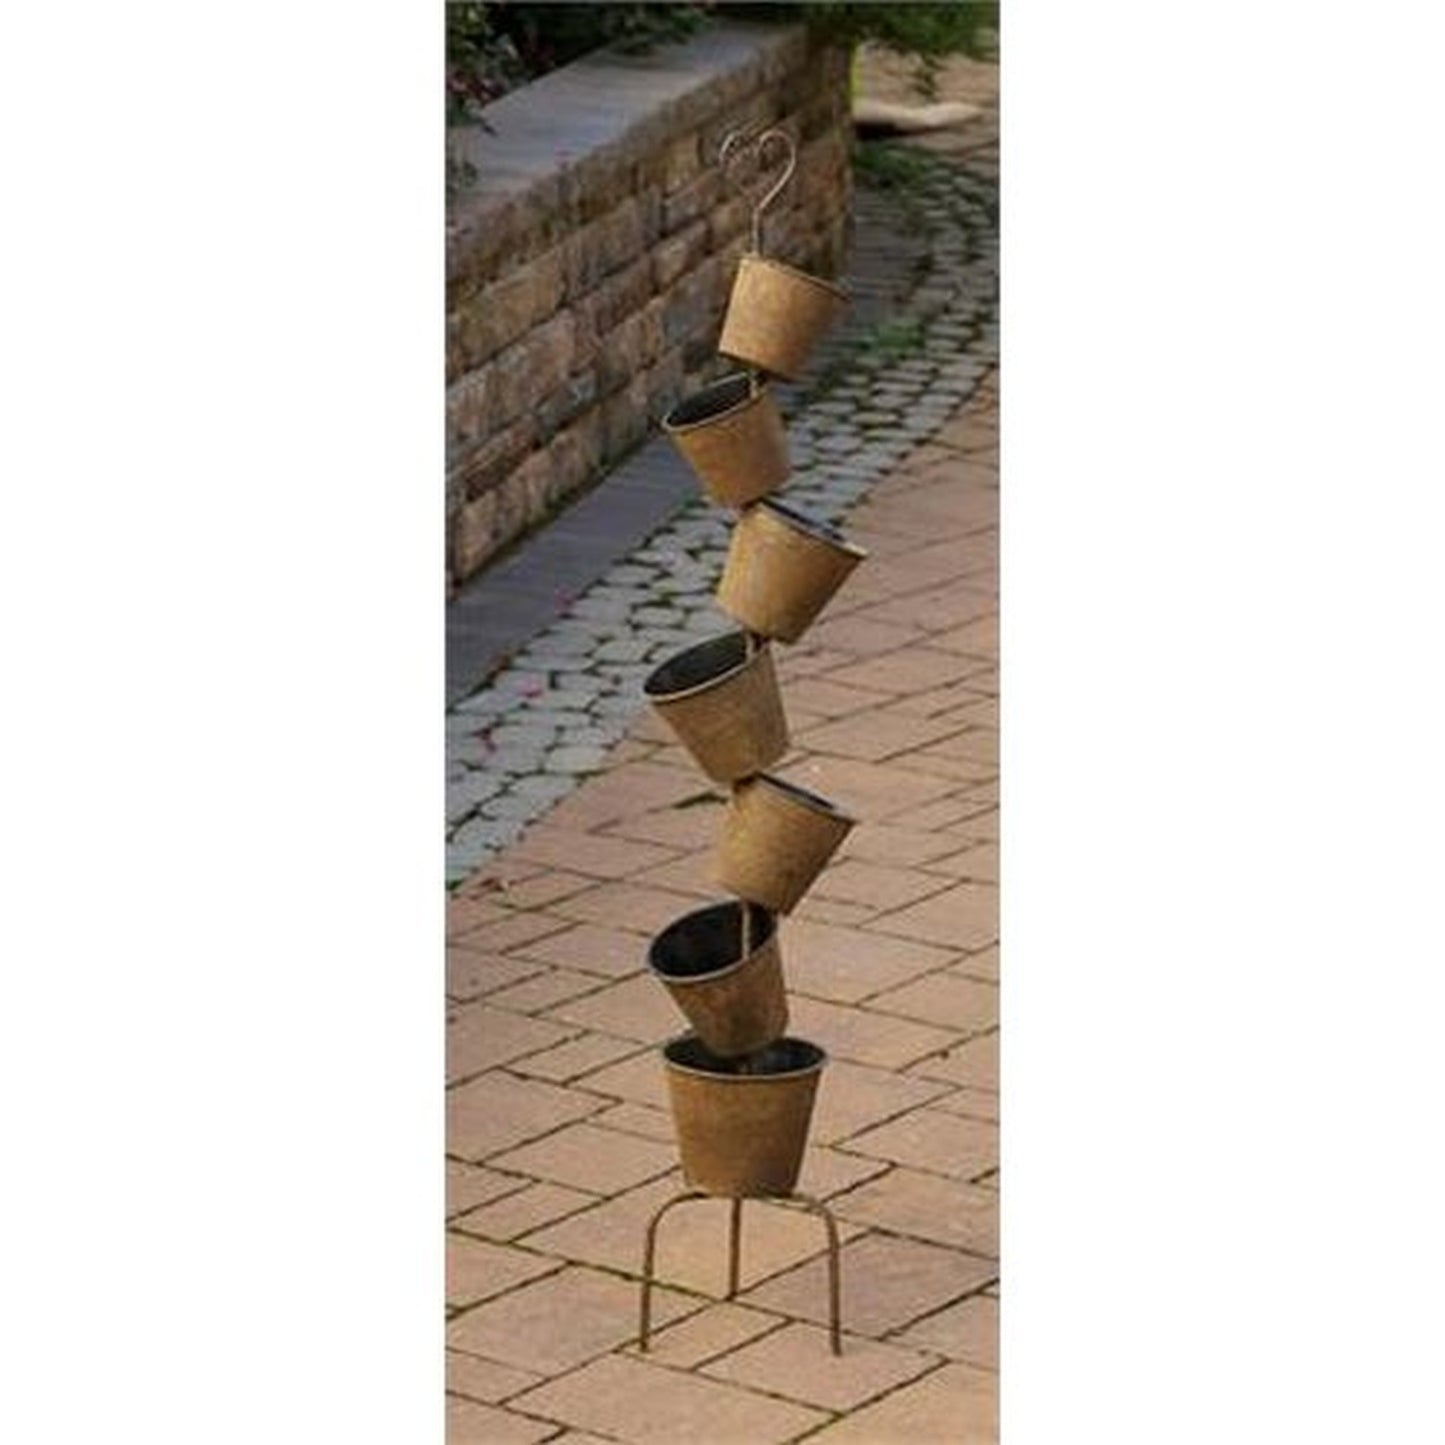 Your Heart's Delight Planter - Stacked Pots, Iron